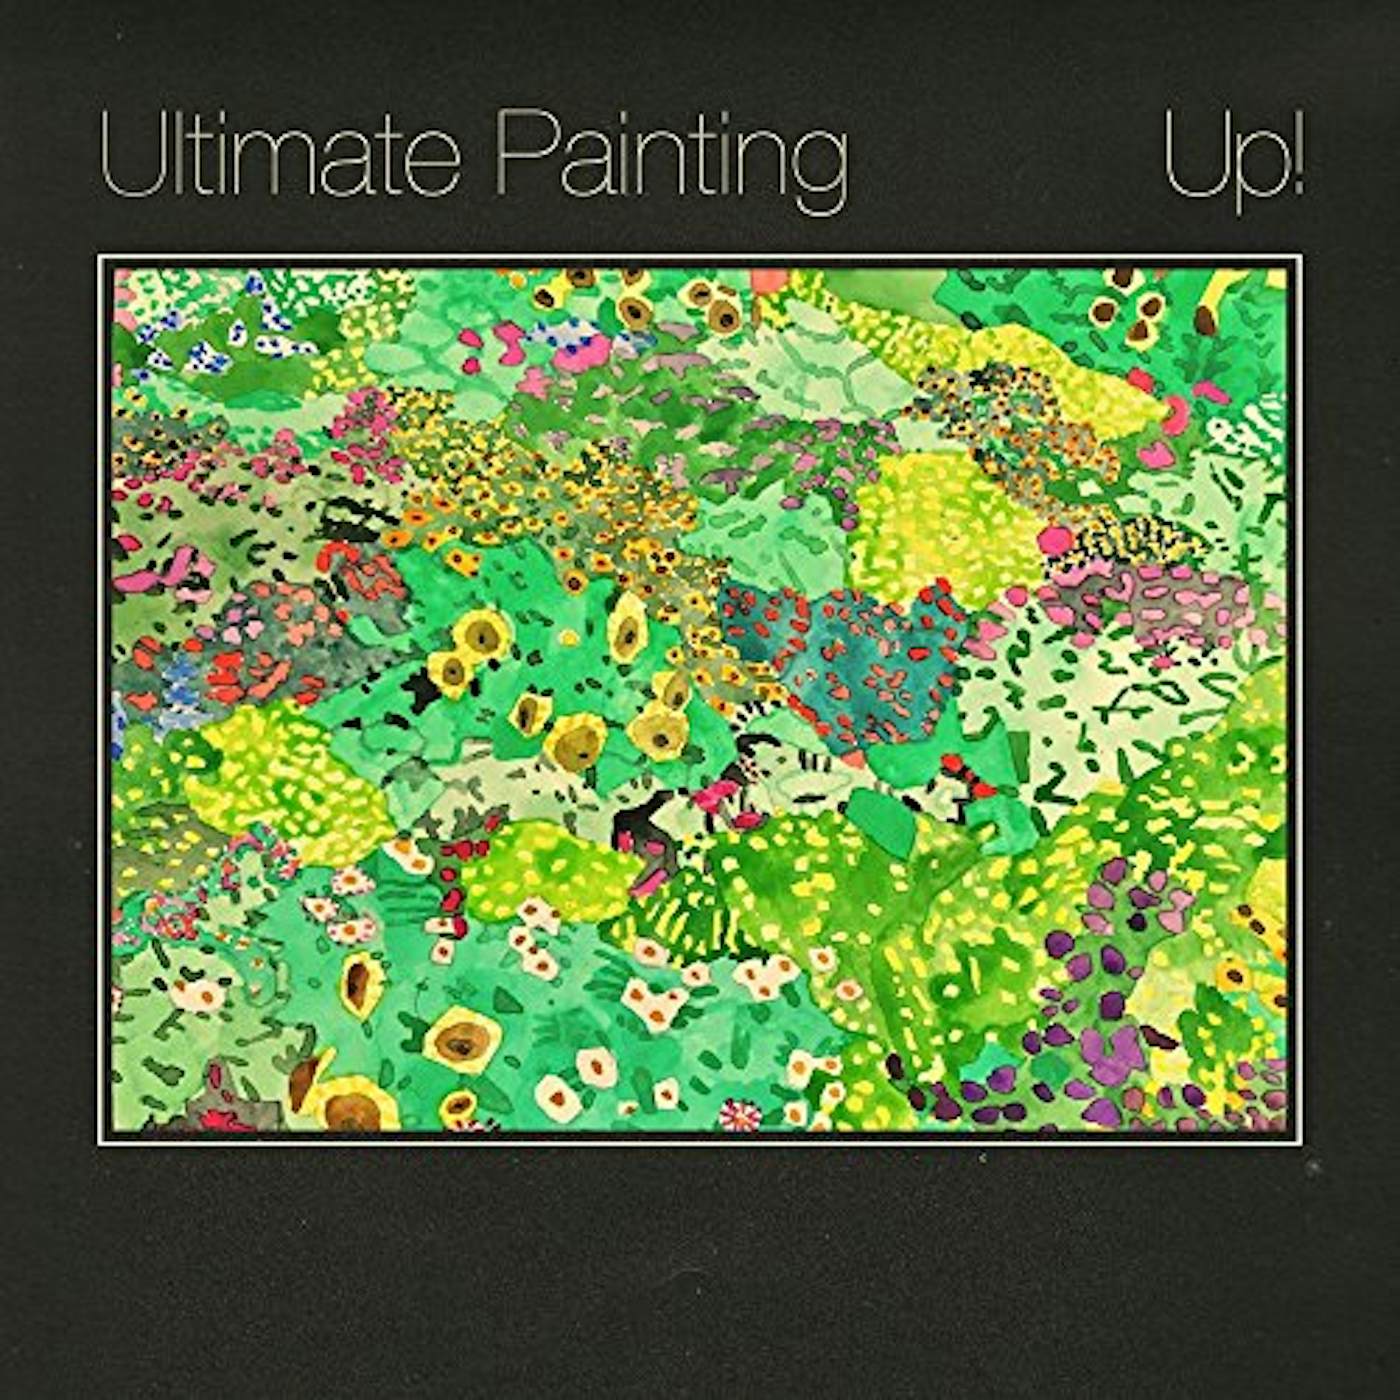 Ultimate Painting UP CD